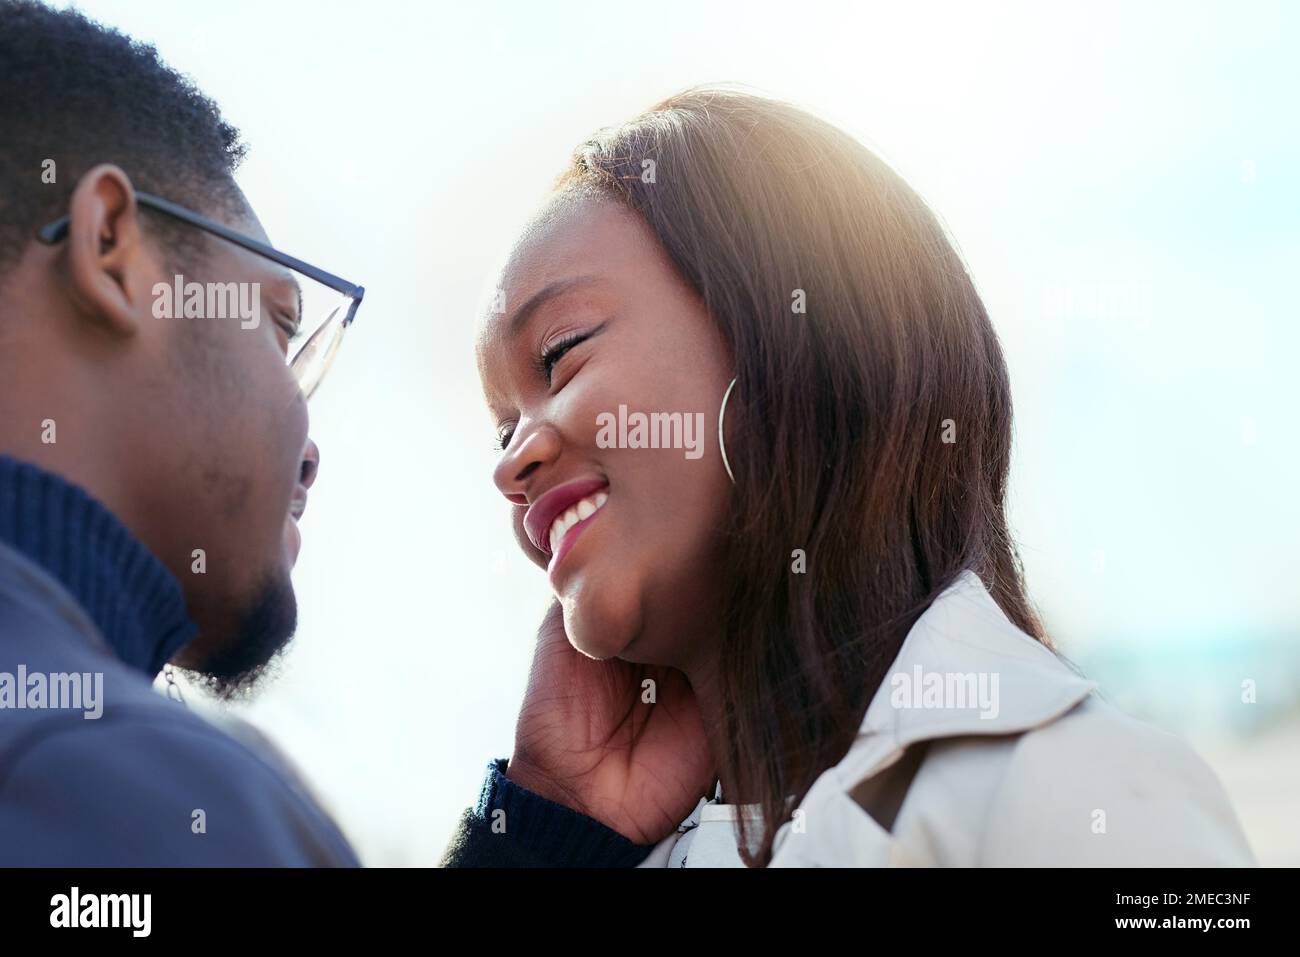 You make me melt. an affectionate young couple bonding together outdoors. Stock Photo